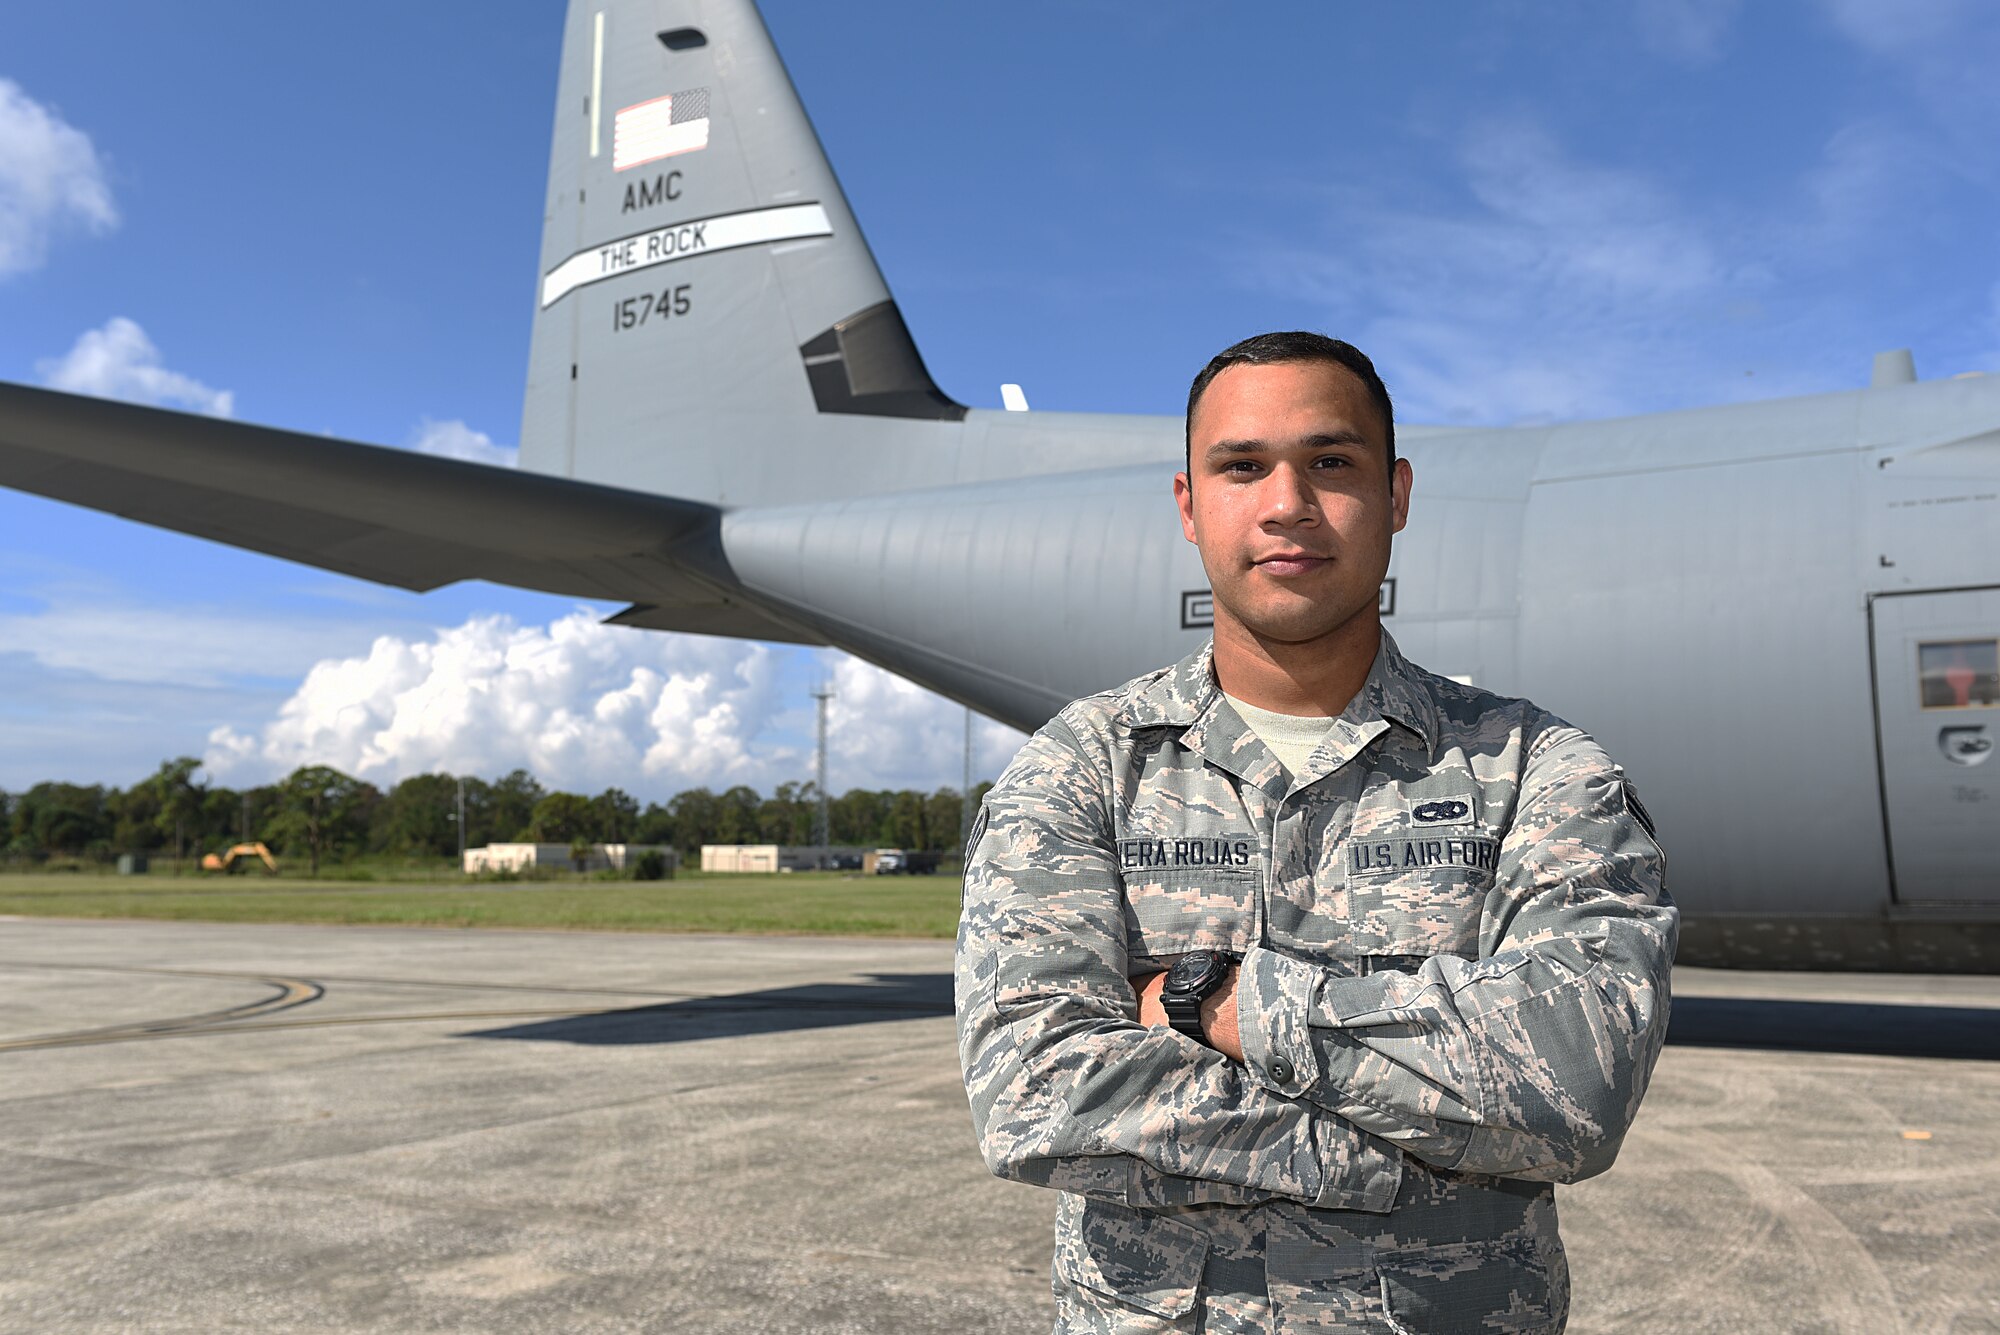 Male Airman stands in front of aircraft tail